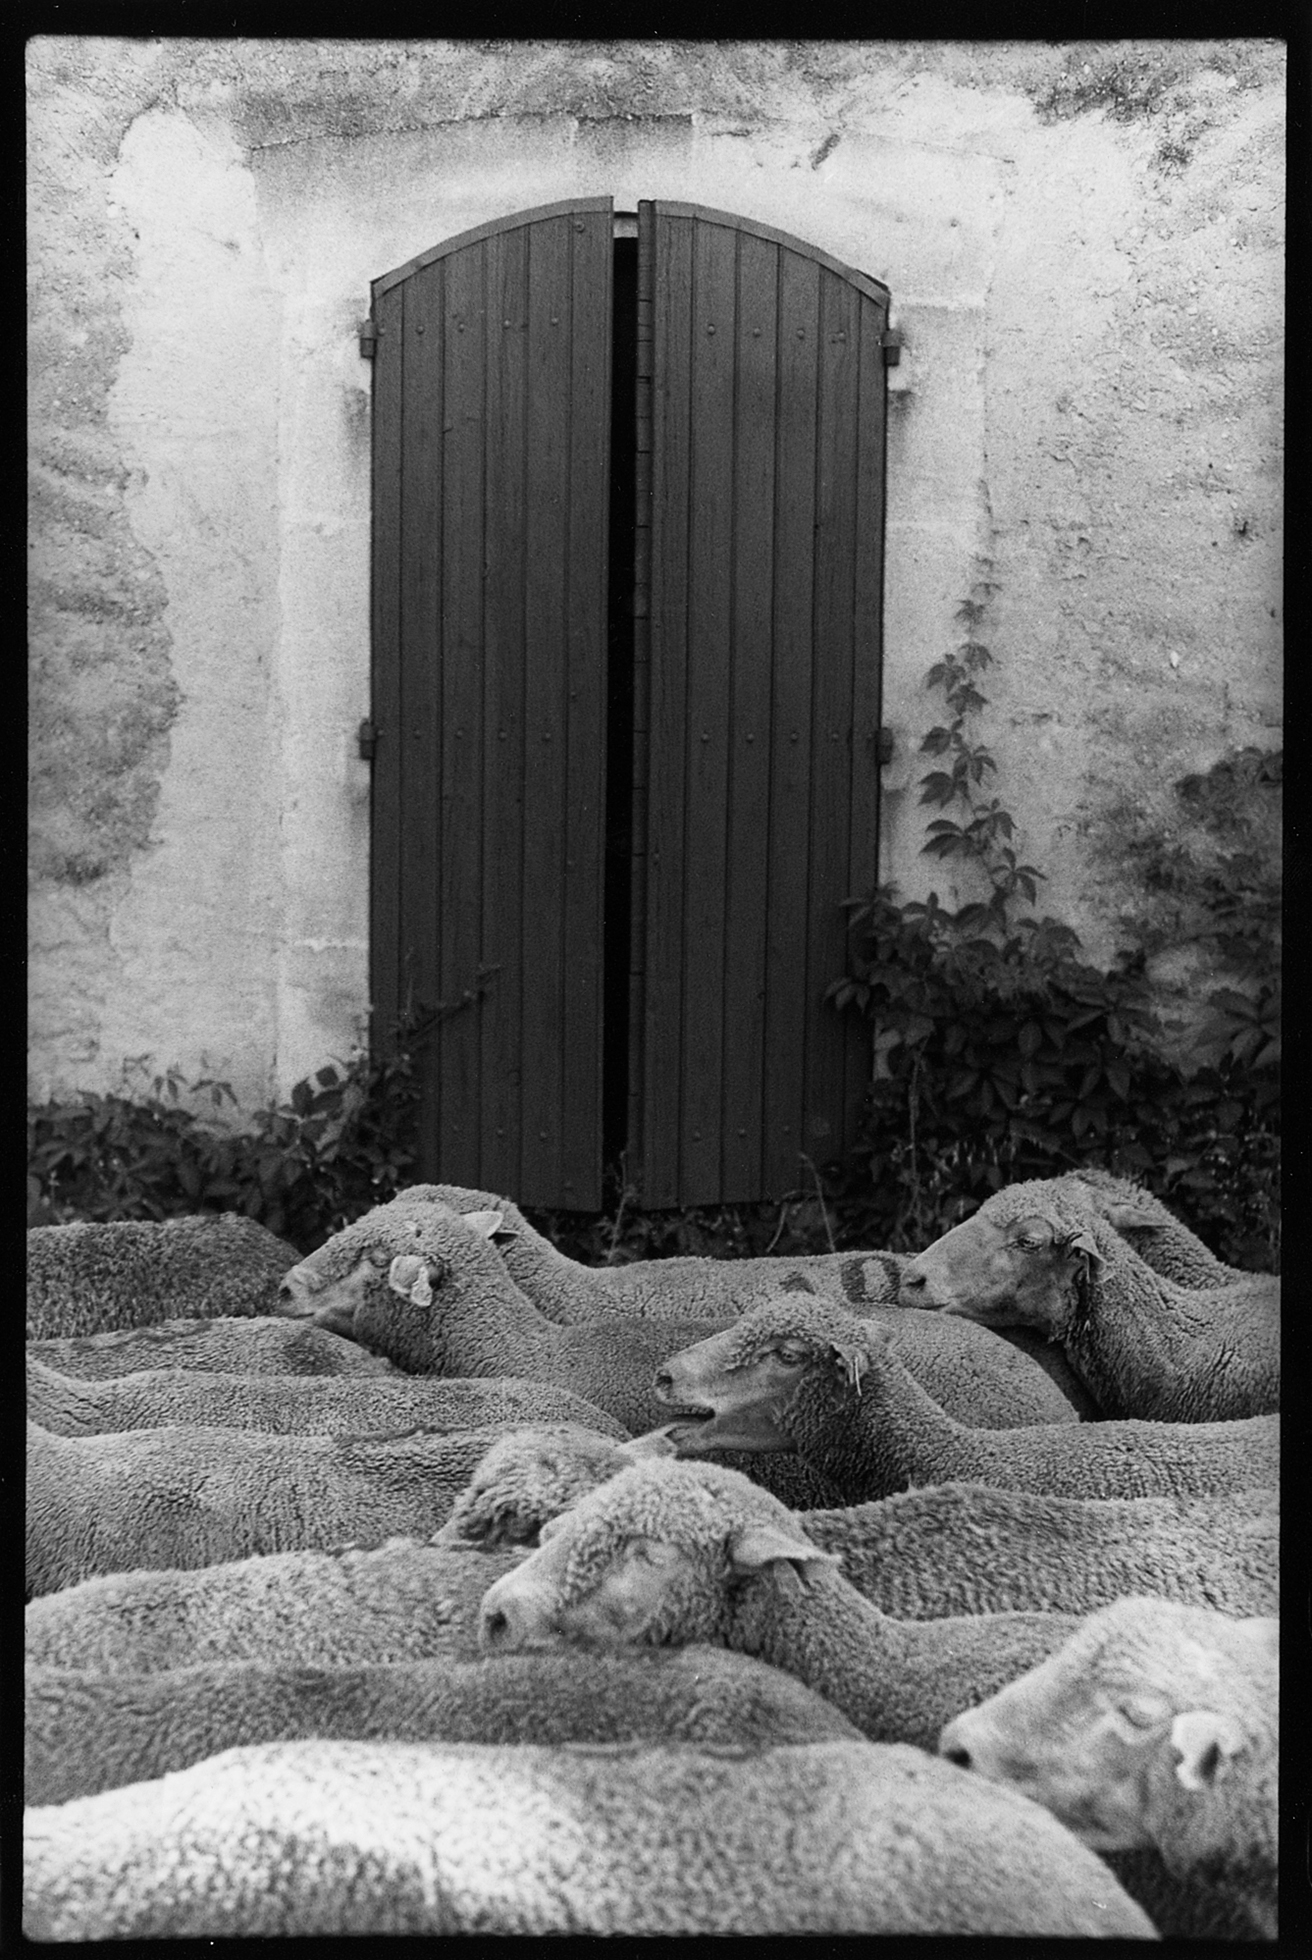 Sheep standing in front of a building with a large wooden doorway and ivy creeping up from the bottom.